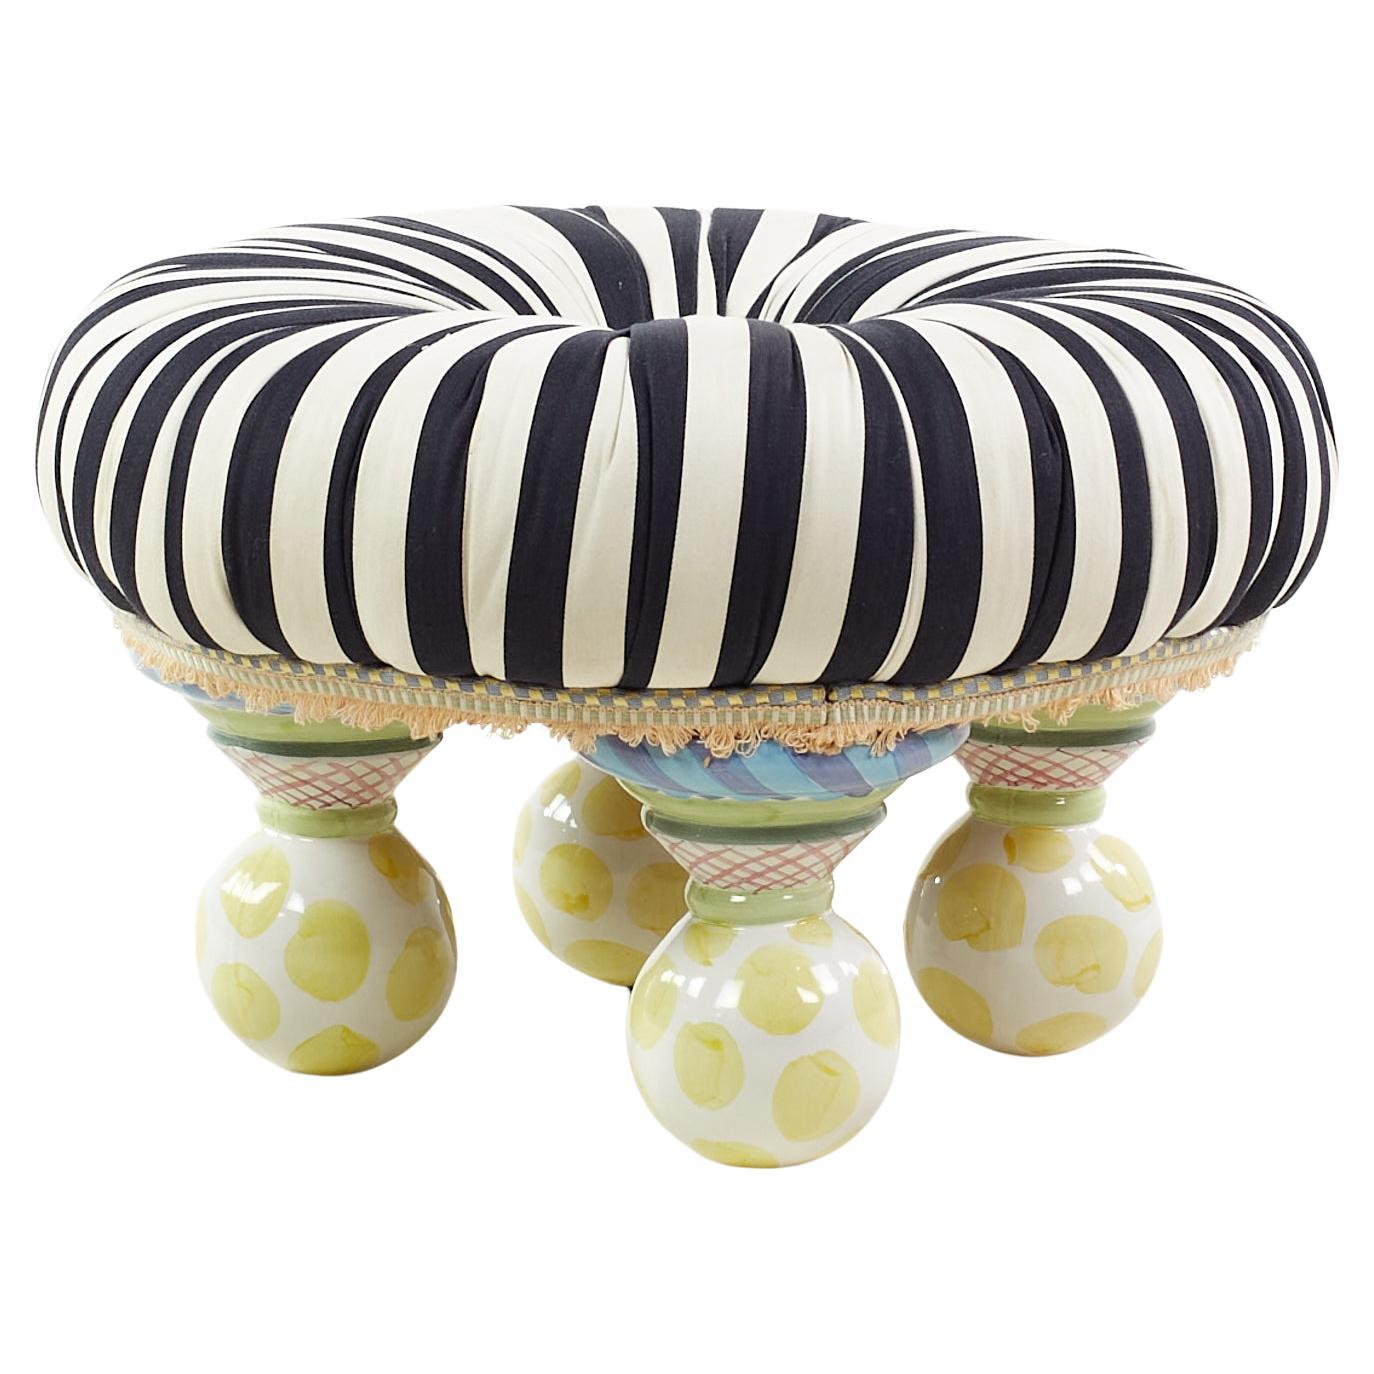 MacKenzie Childs Contemporary Ottoman with Hand Painted Porcelain Legs